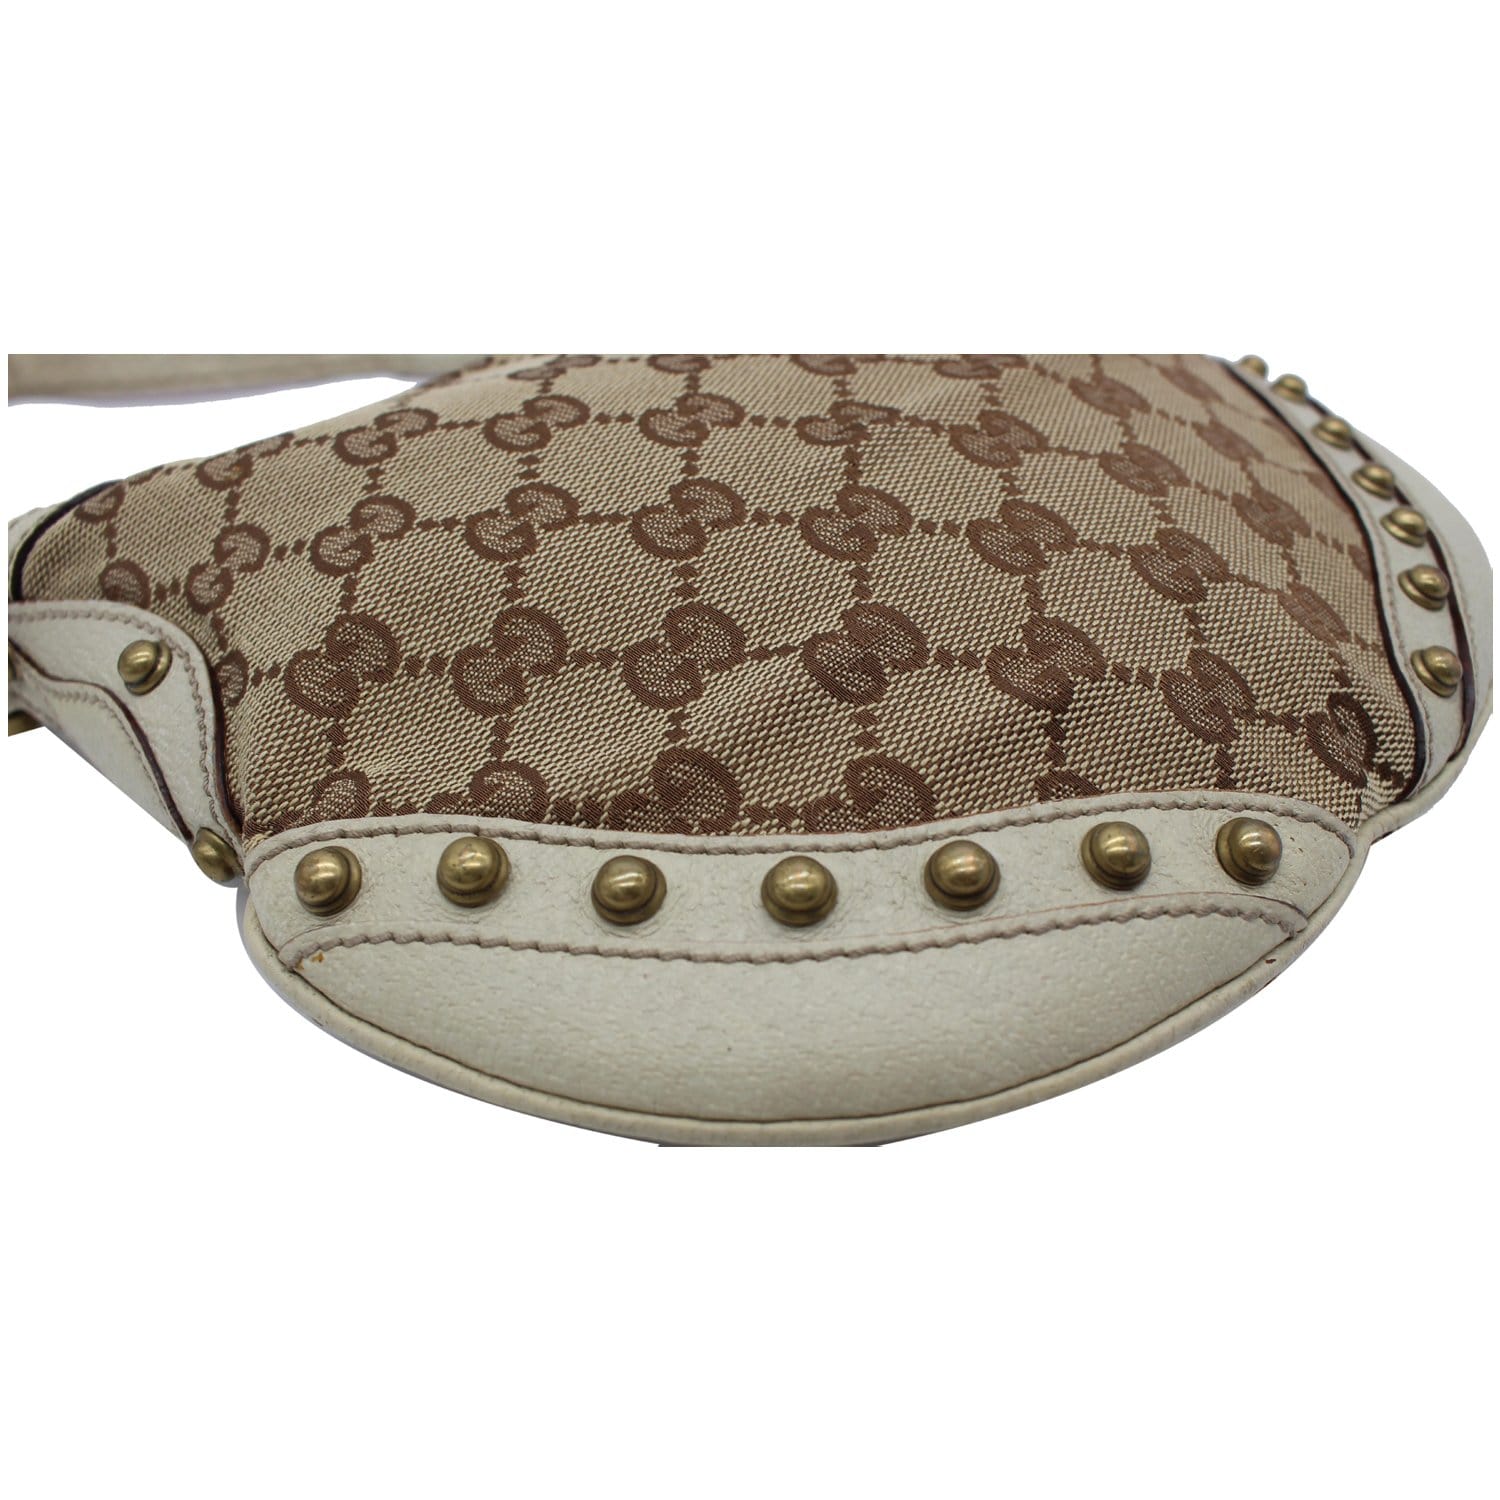 Petite GG small shoulder bag in Beige GG Canvas